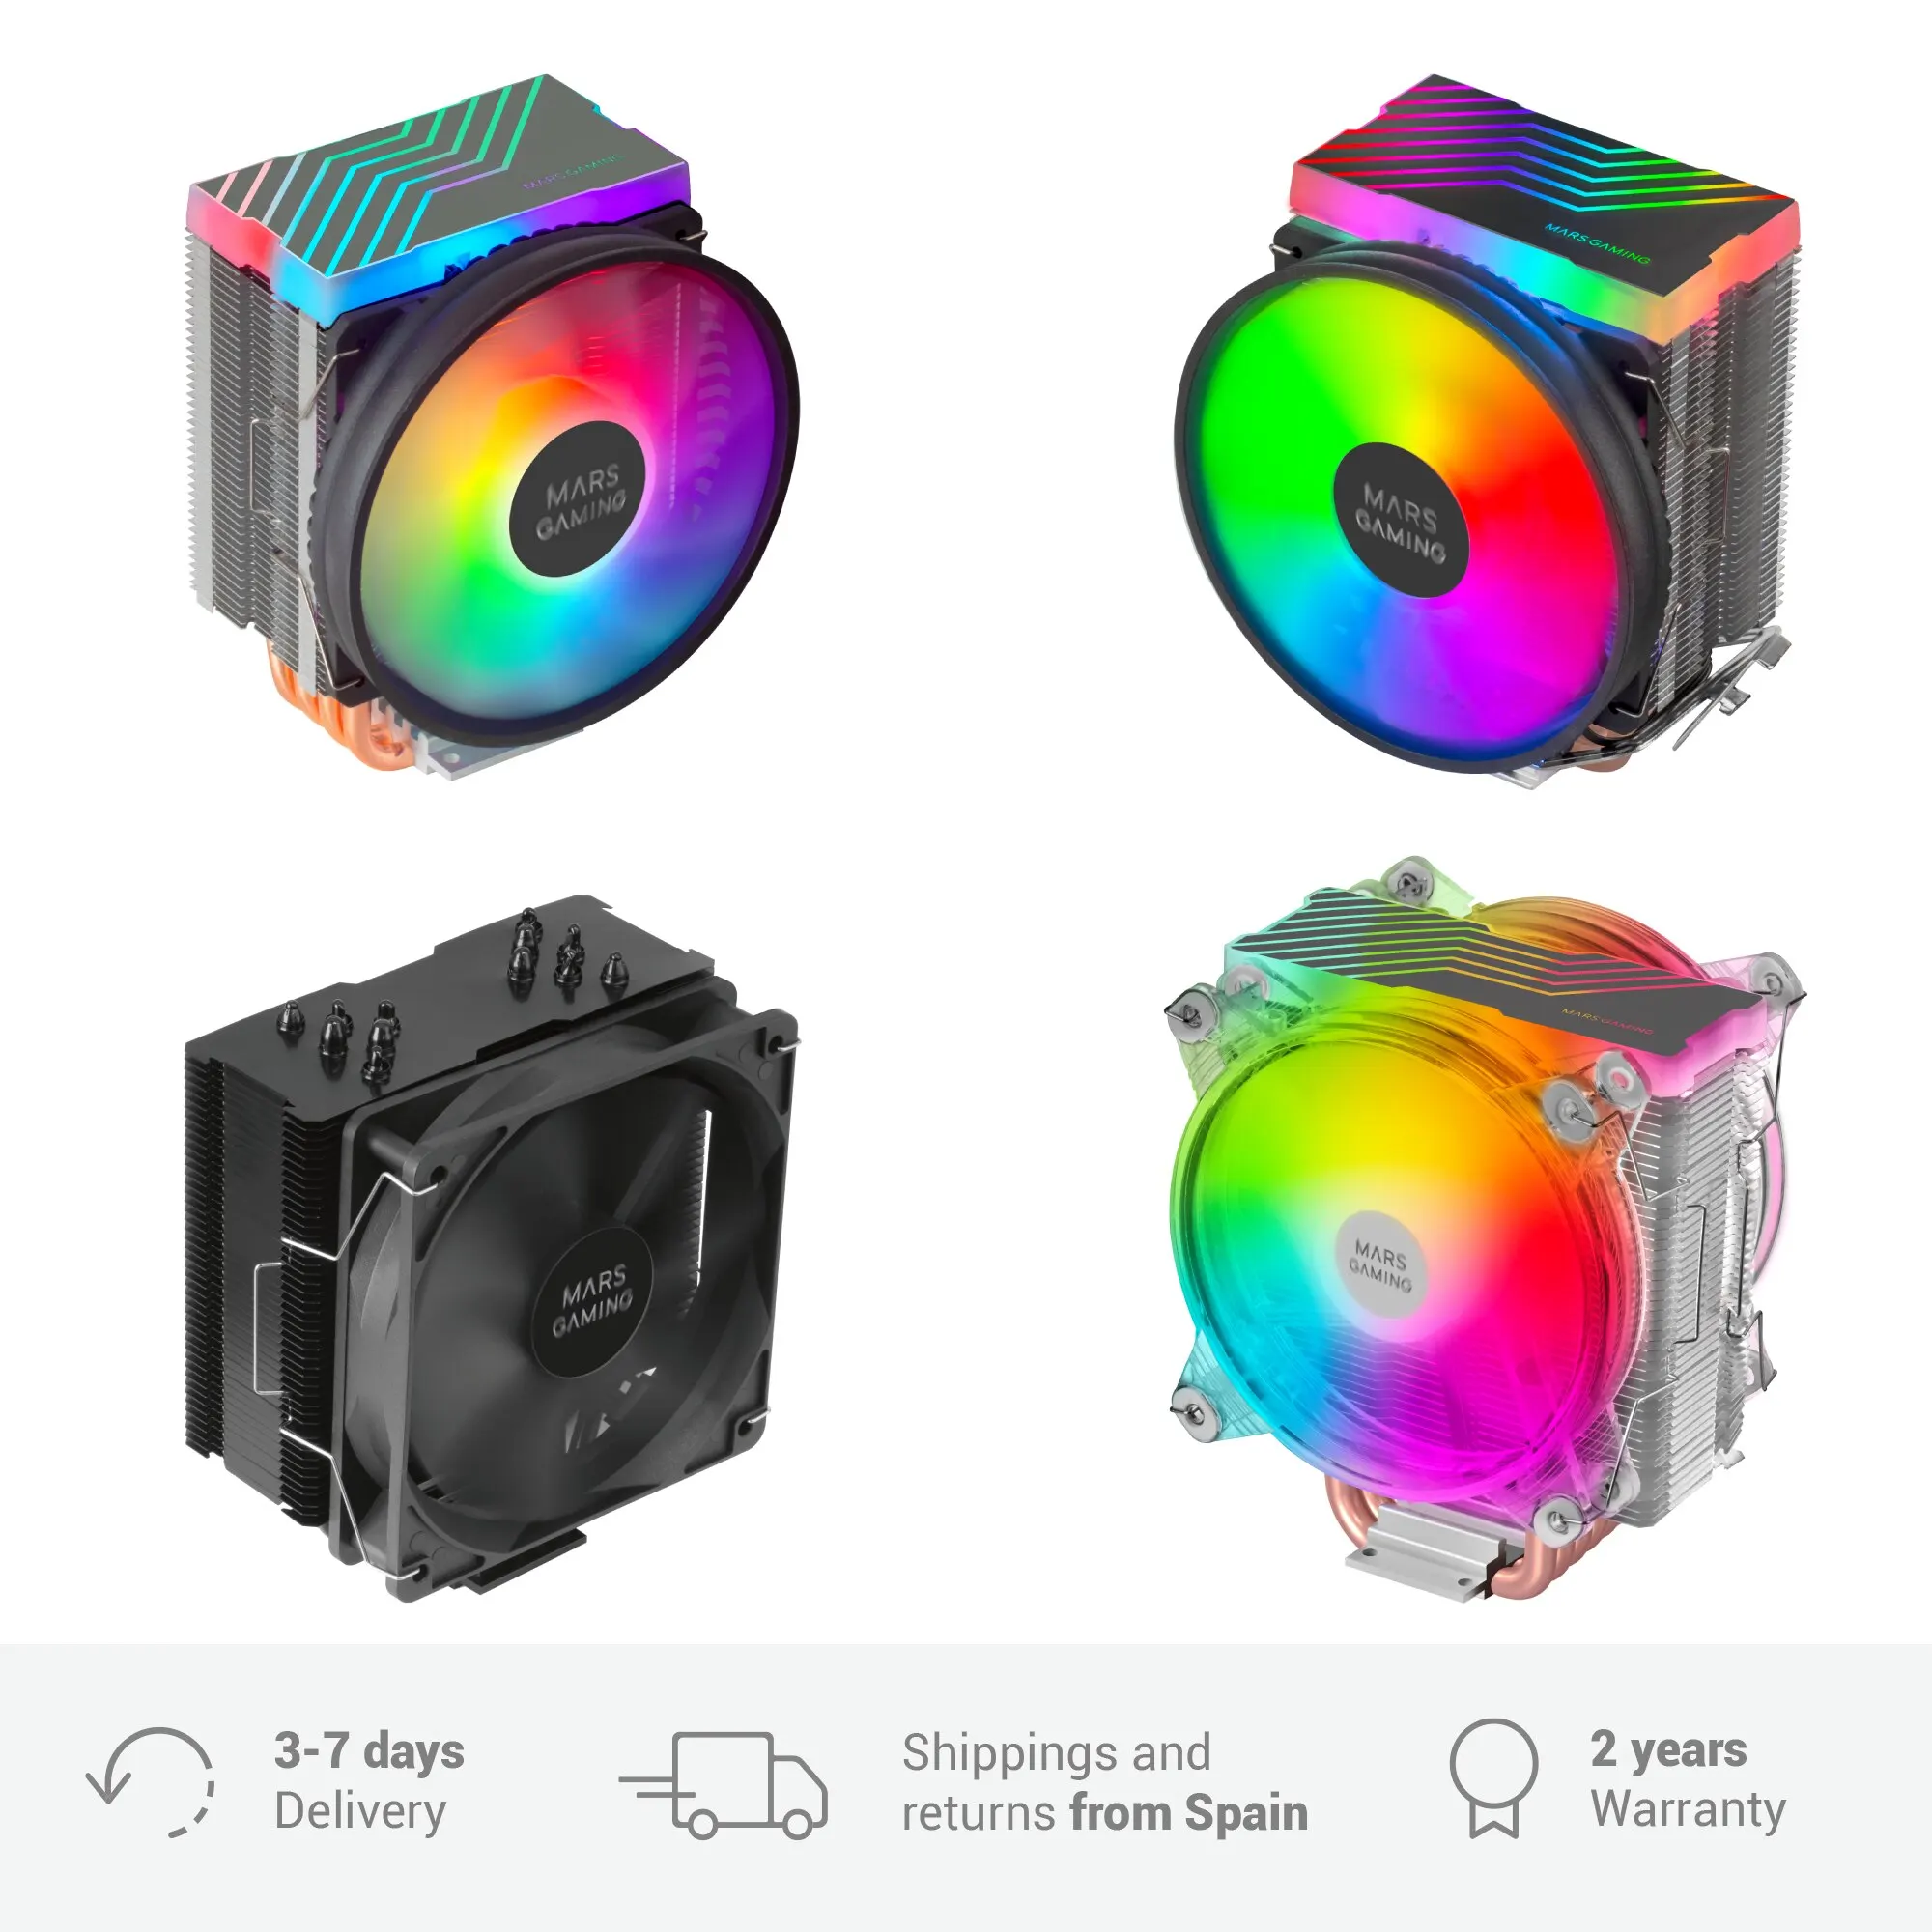 Mars Gaming MCPU, CPU cooler, computer cooling black or with RGB lighting,  from 160W to 200W TDP - AliExpress